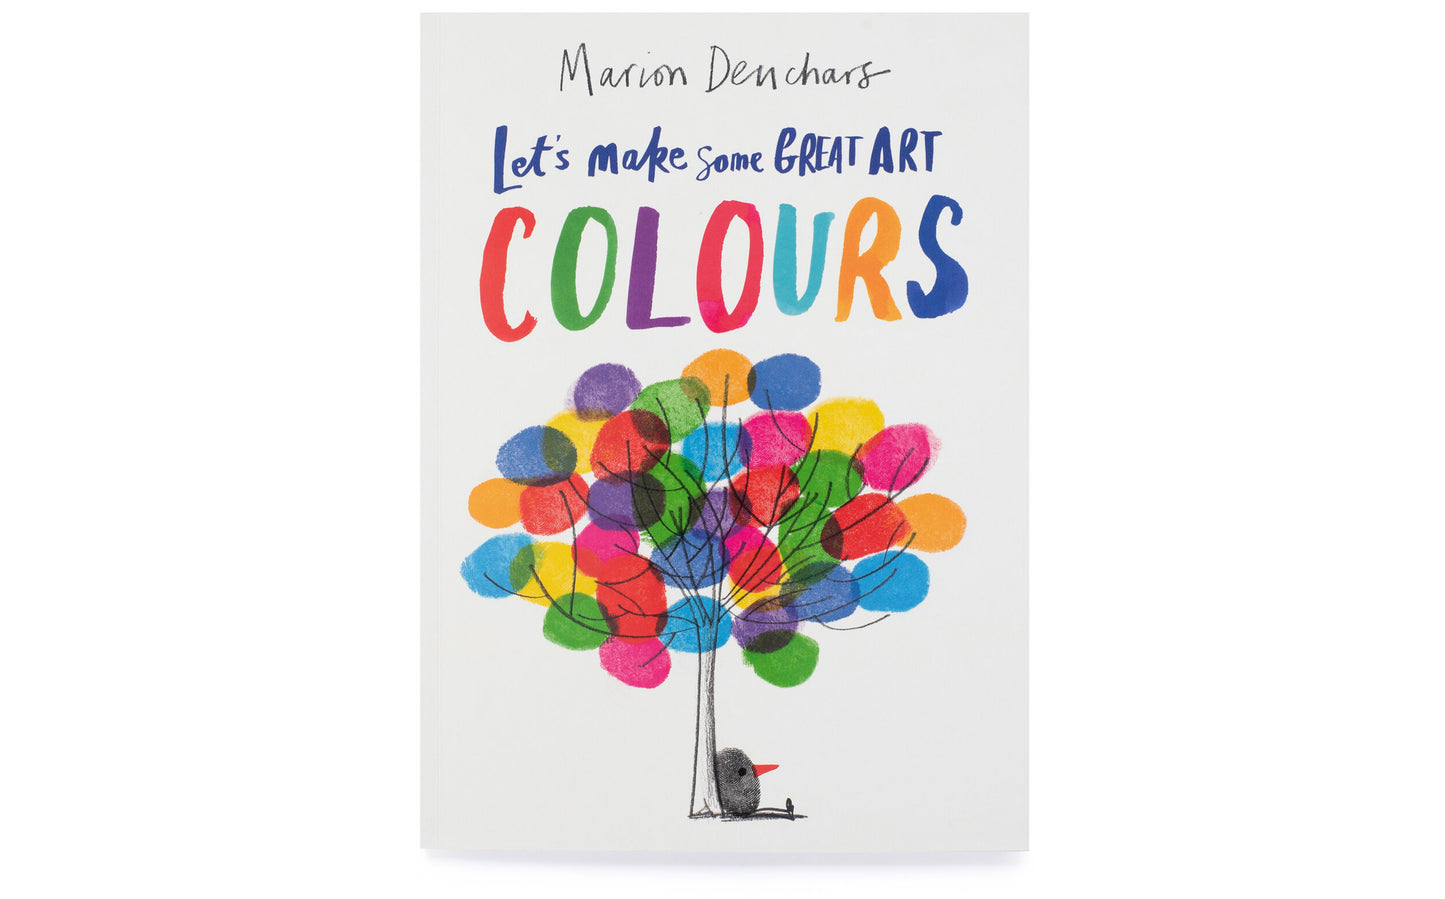 Let’s Make Some Great Art - Colours by Marion Deuchars